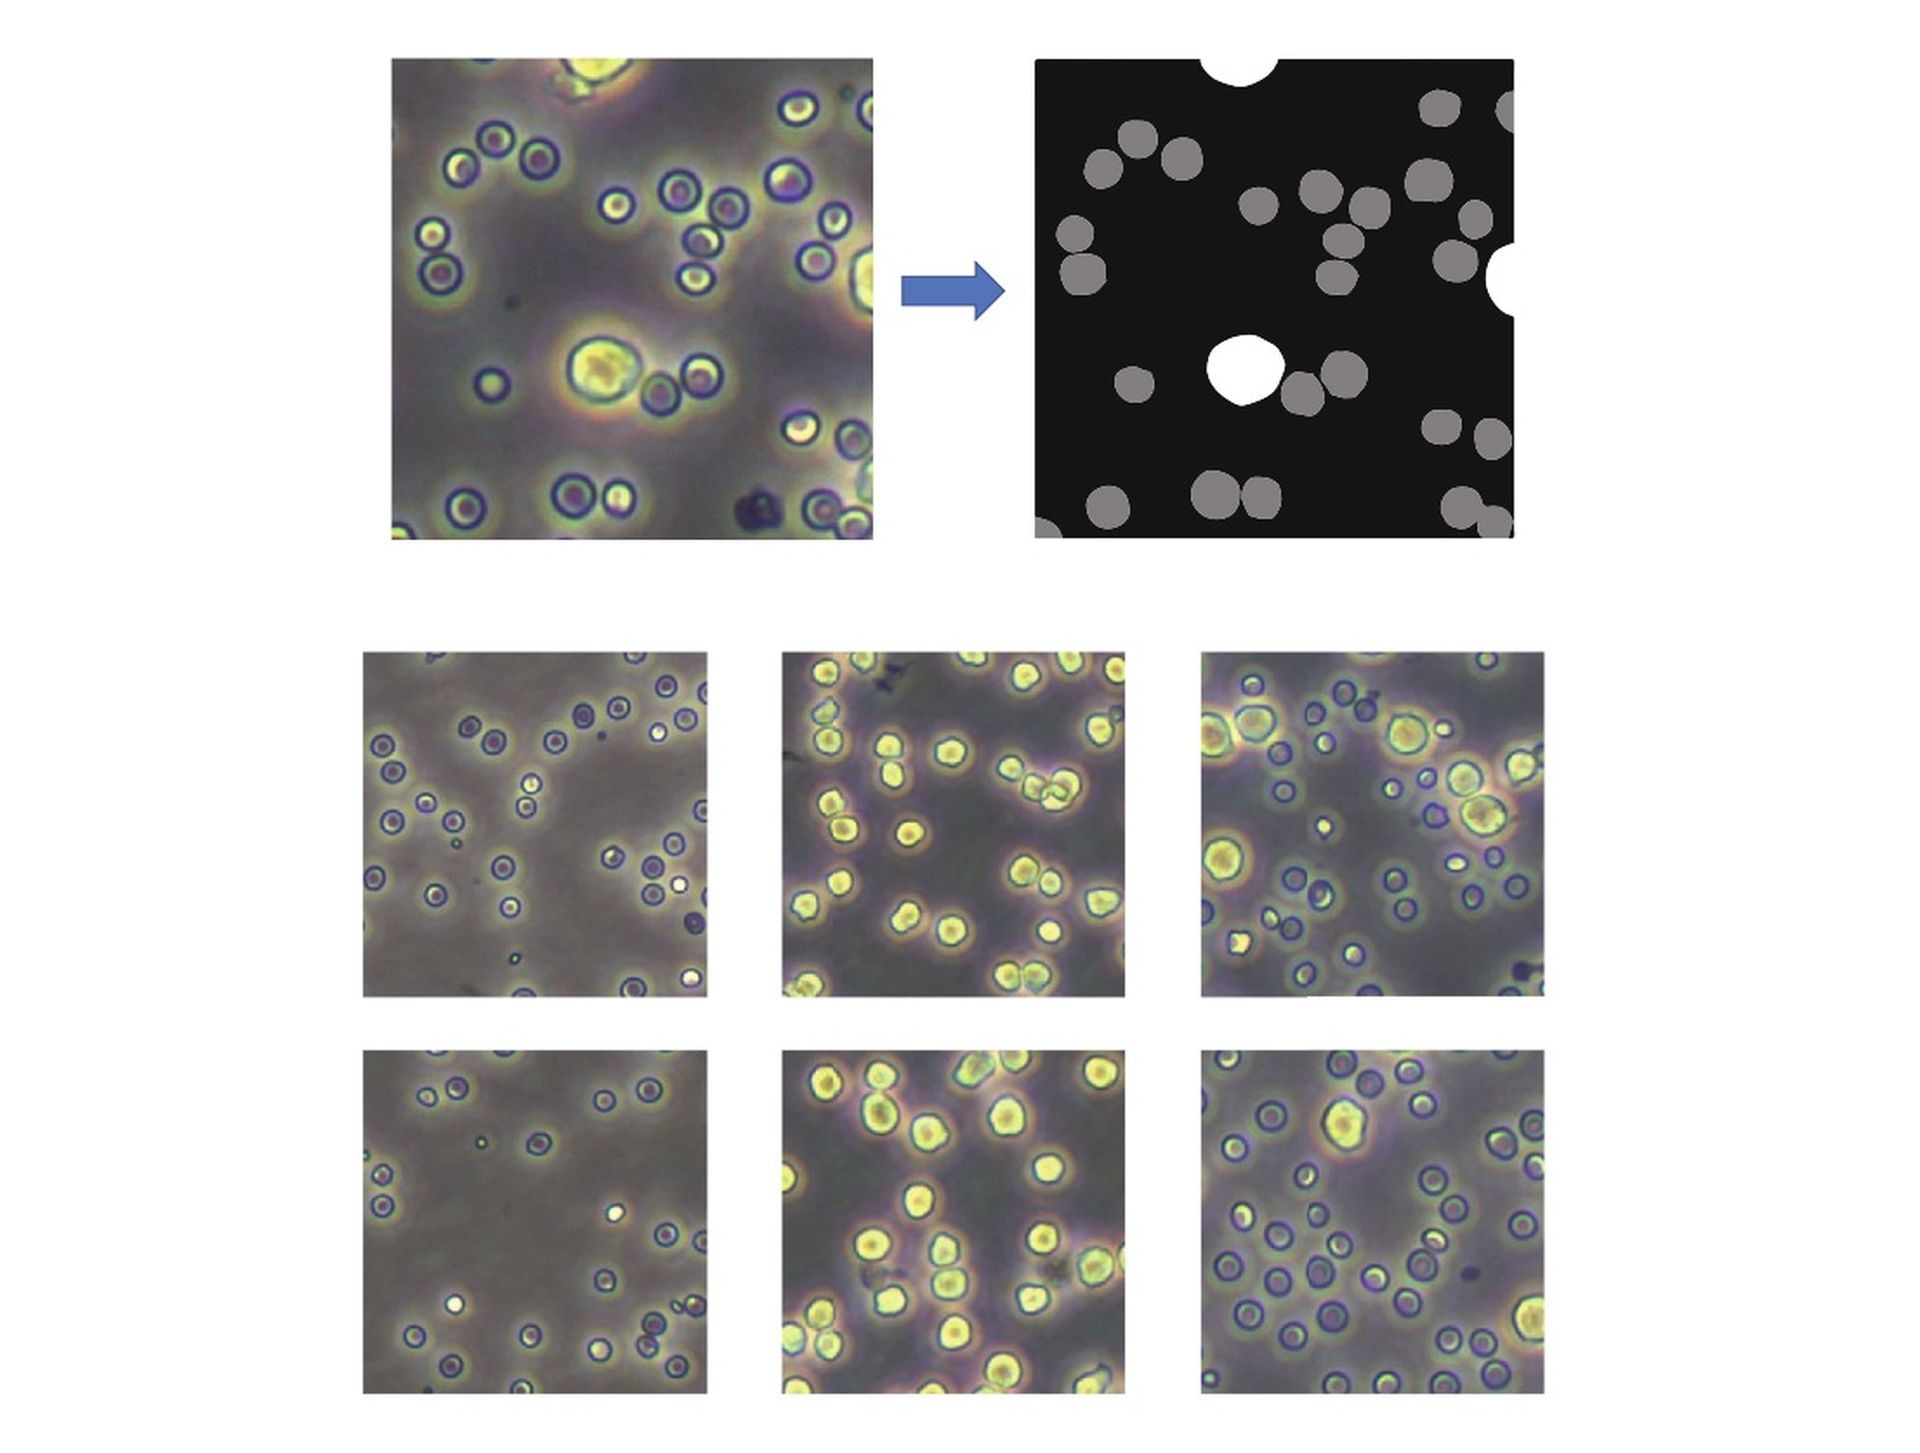 CNNs have been used to identify cells in photos that include only a single type of cell. nvolvement. The ML method capable of count cells aims to eliminate human involvement.